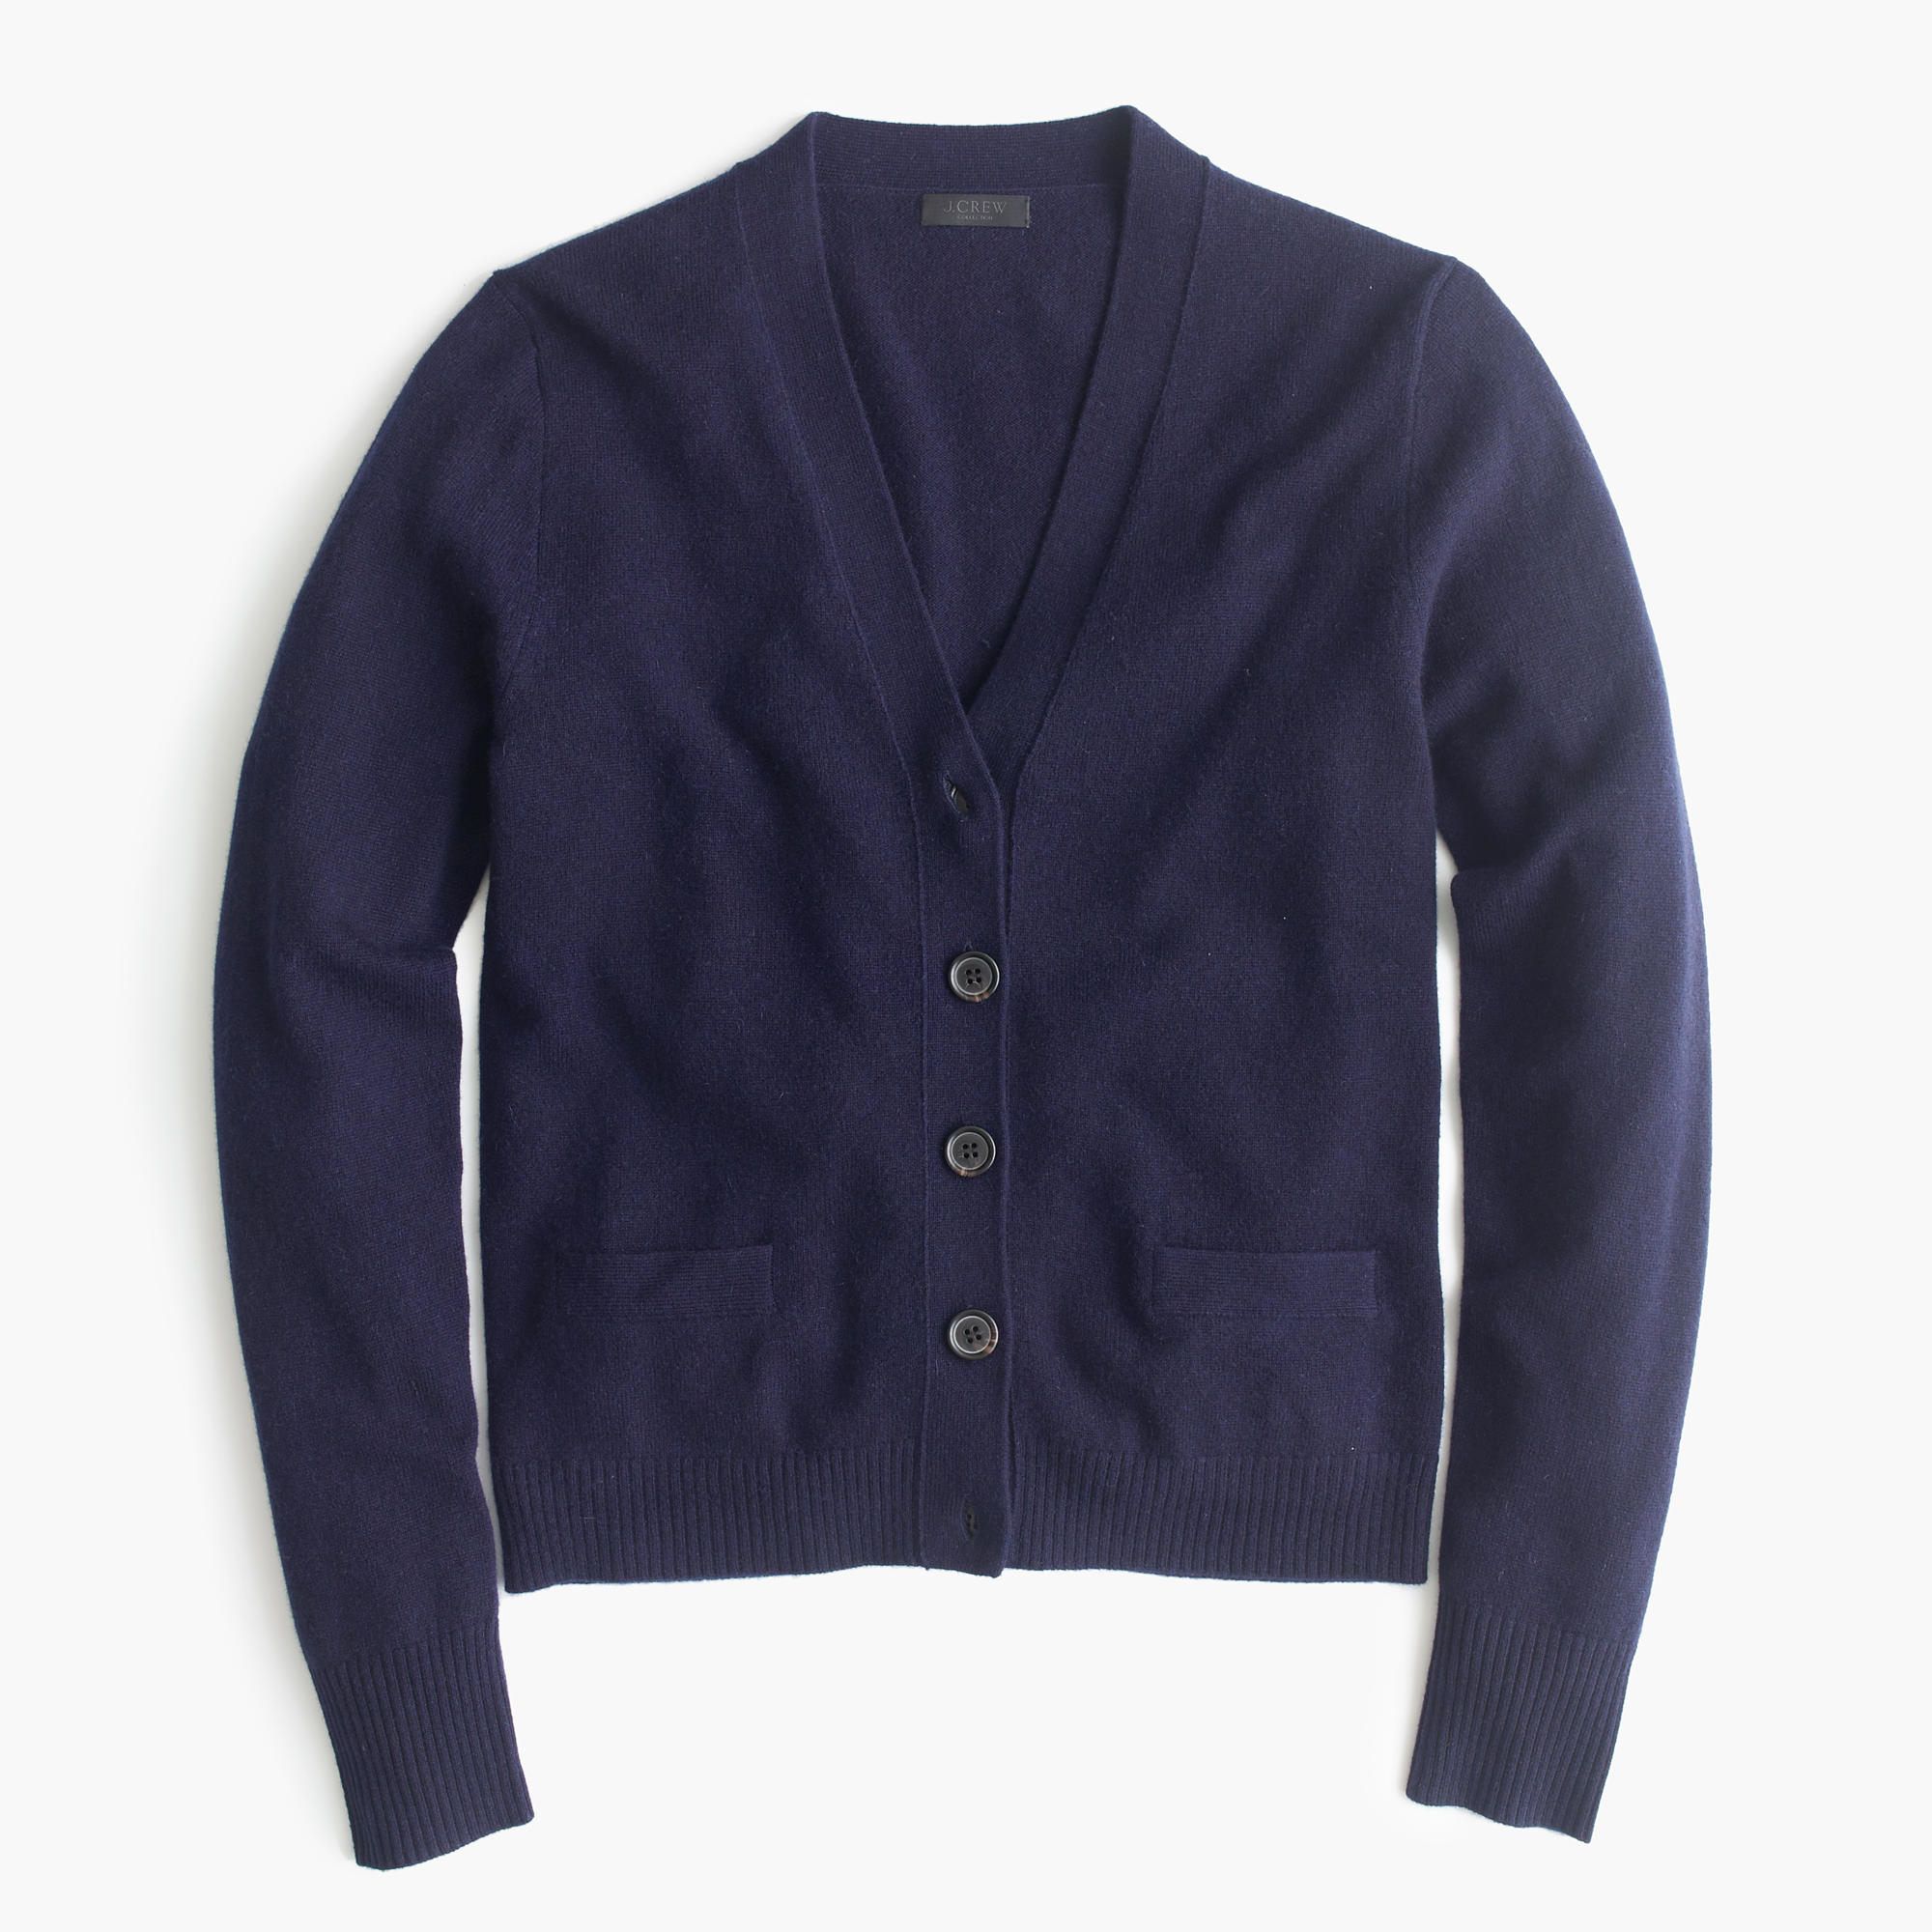 J.crew Collection Cashmere Short Cardigan Sweater in Blue (hthr midnight)